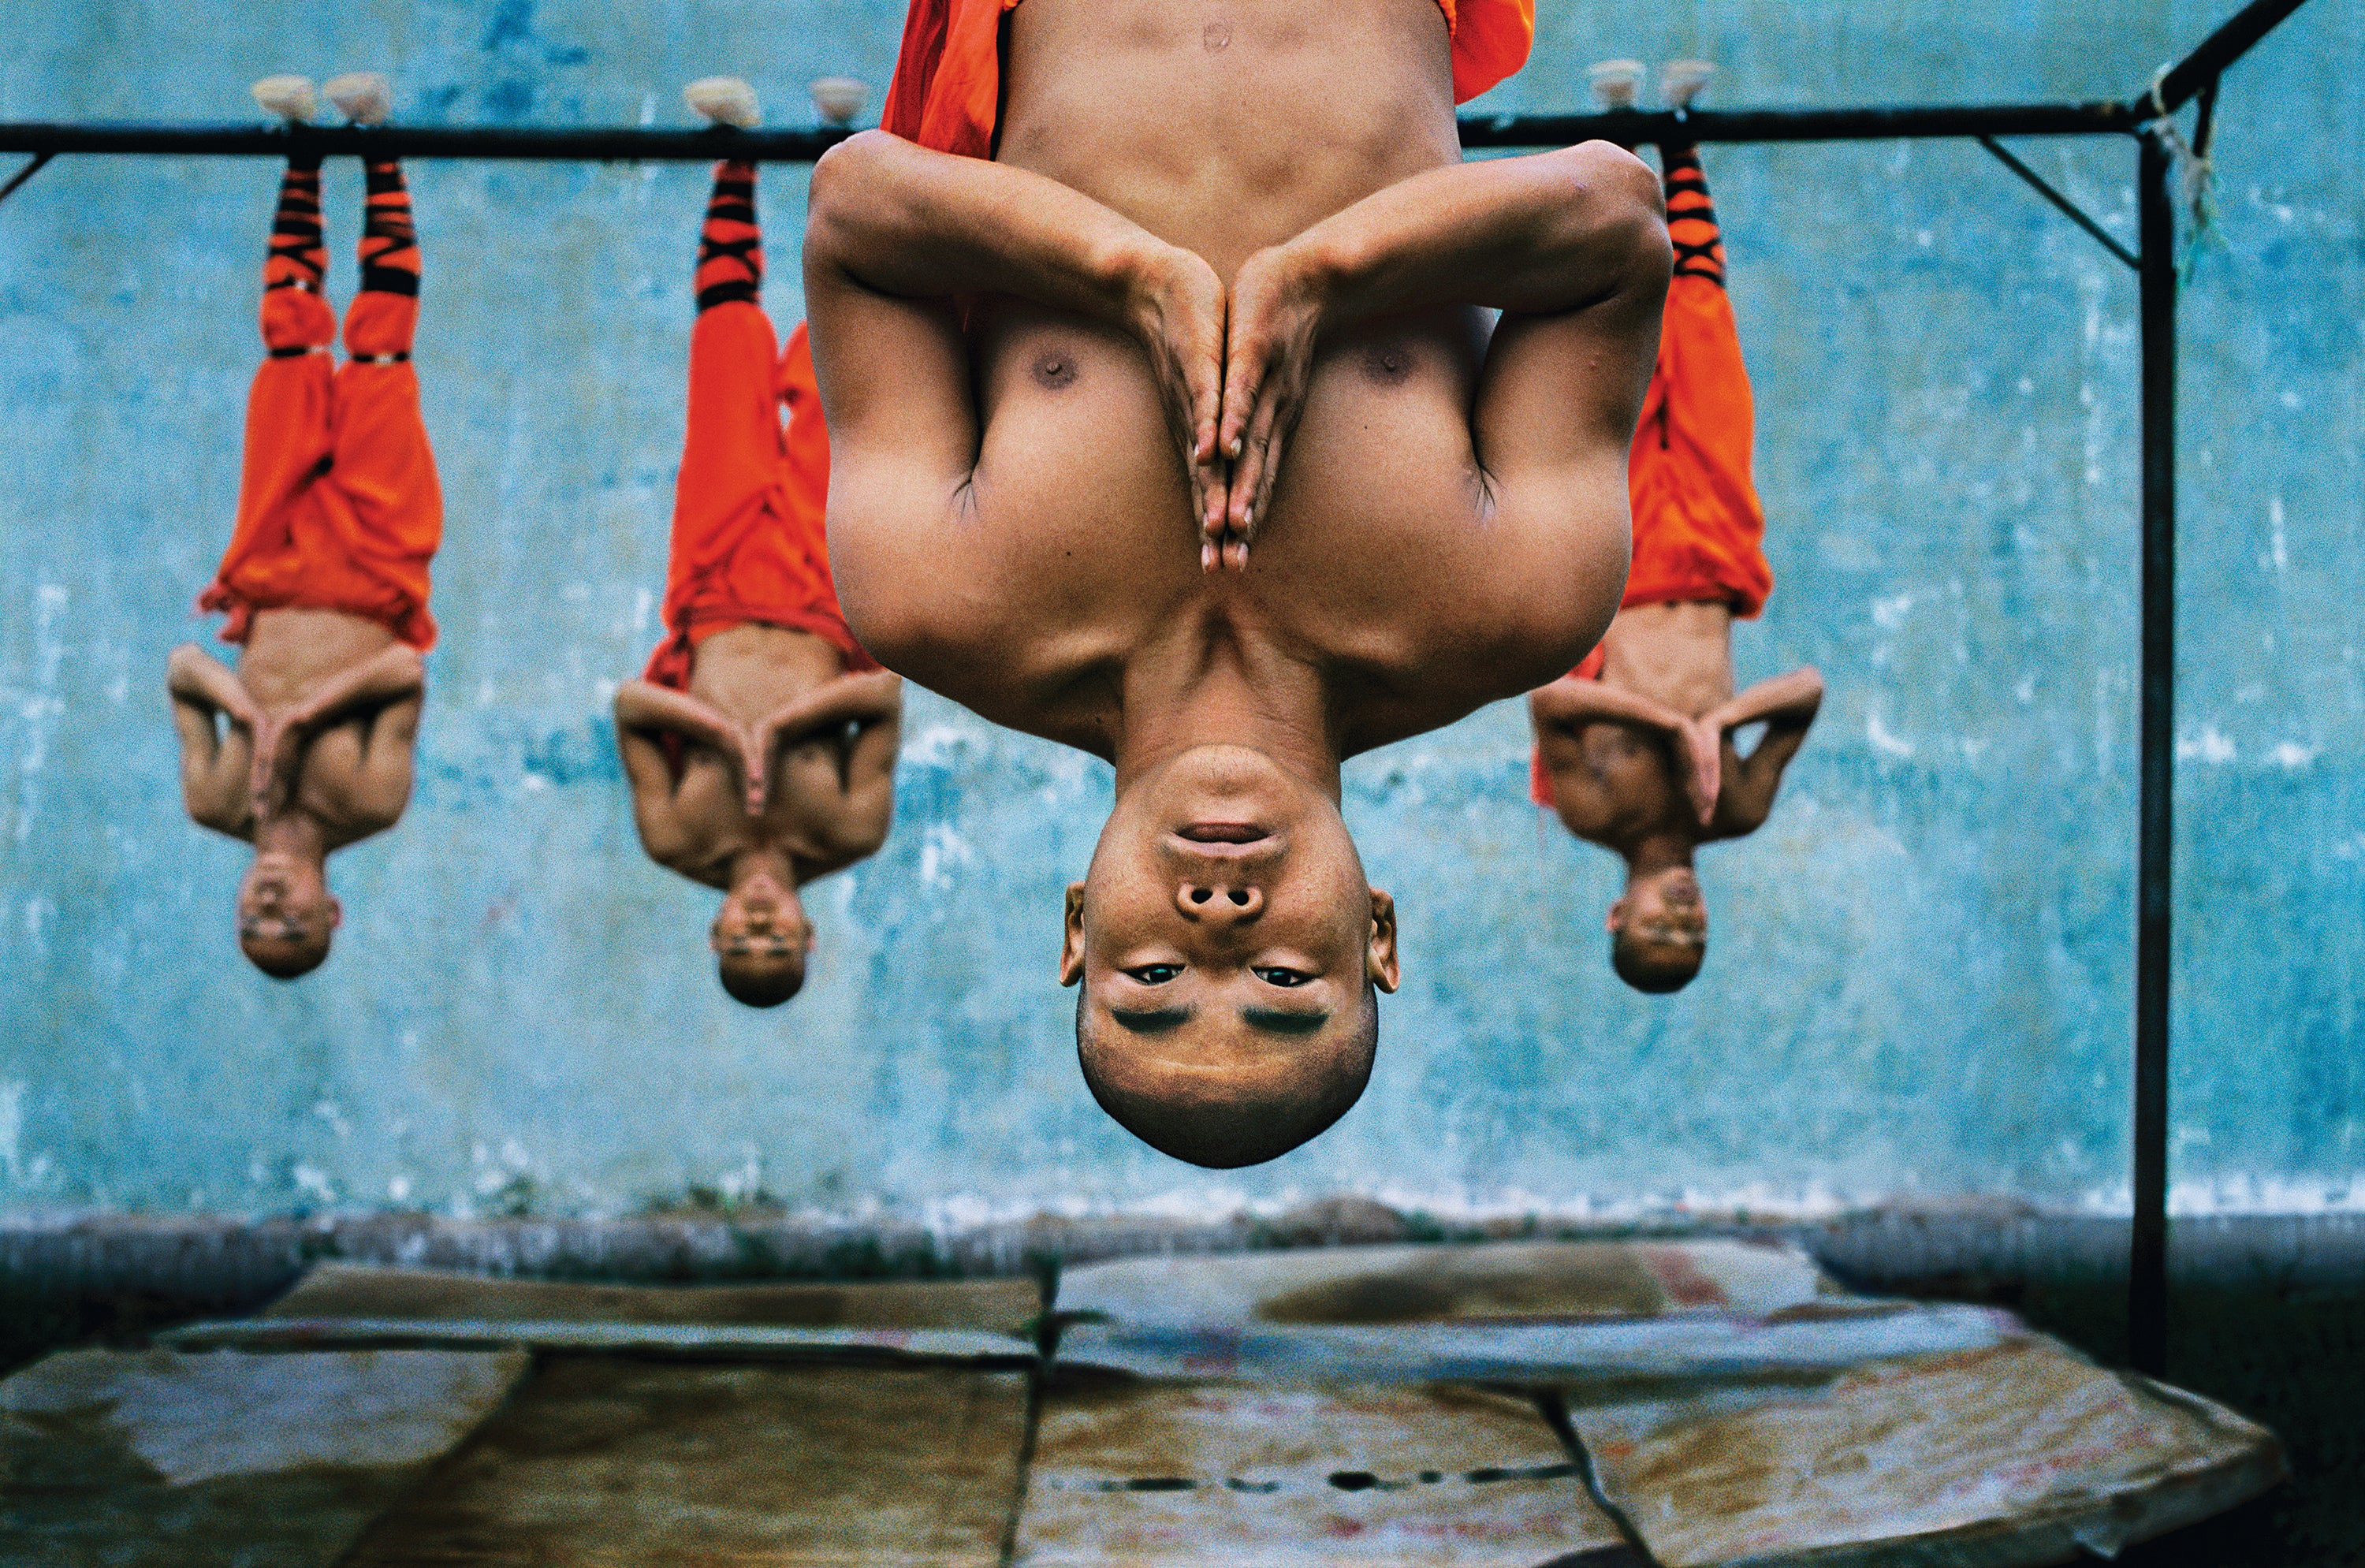 Monks suspend themselves from a metal beam as they train at the Shaolin Monastery in Zhengzhou, China. The physical strength and dexterity displayed by the monks is incredible, although they exude a deep serenity